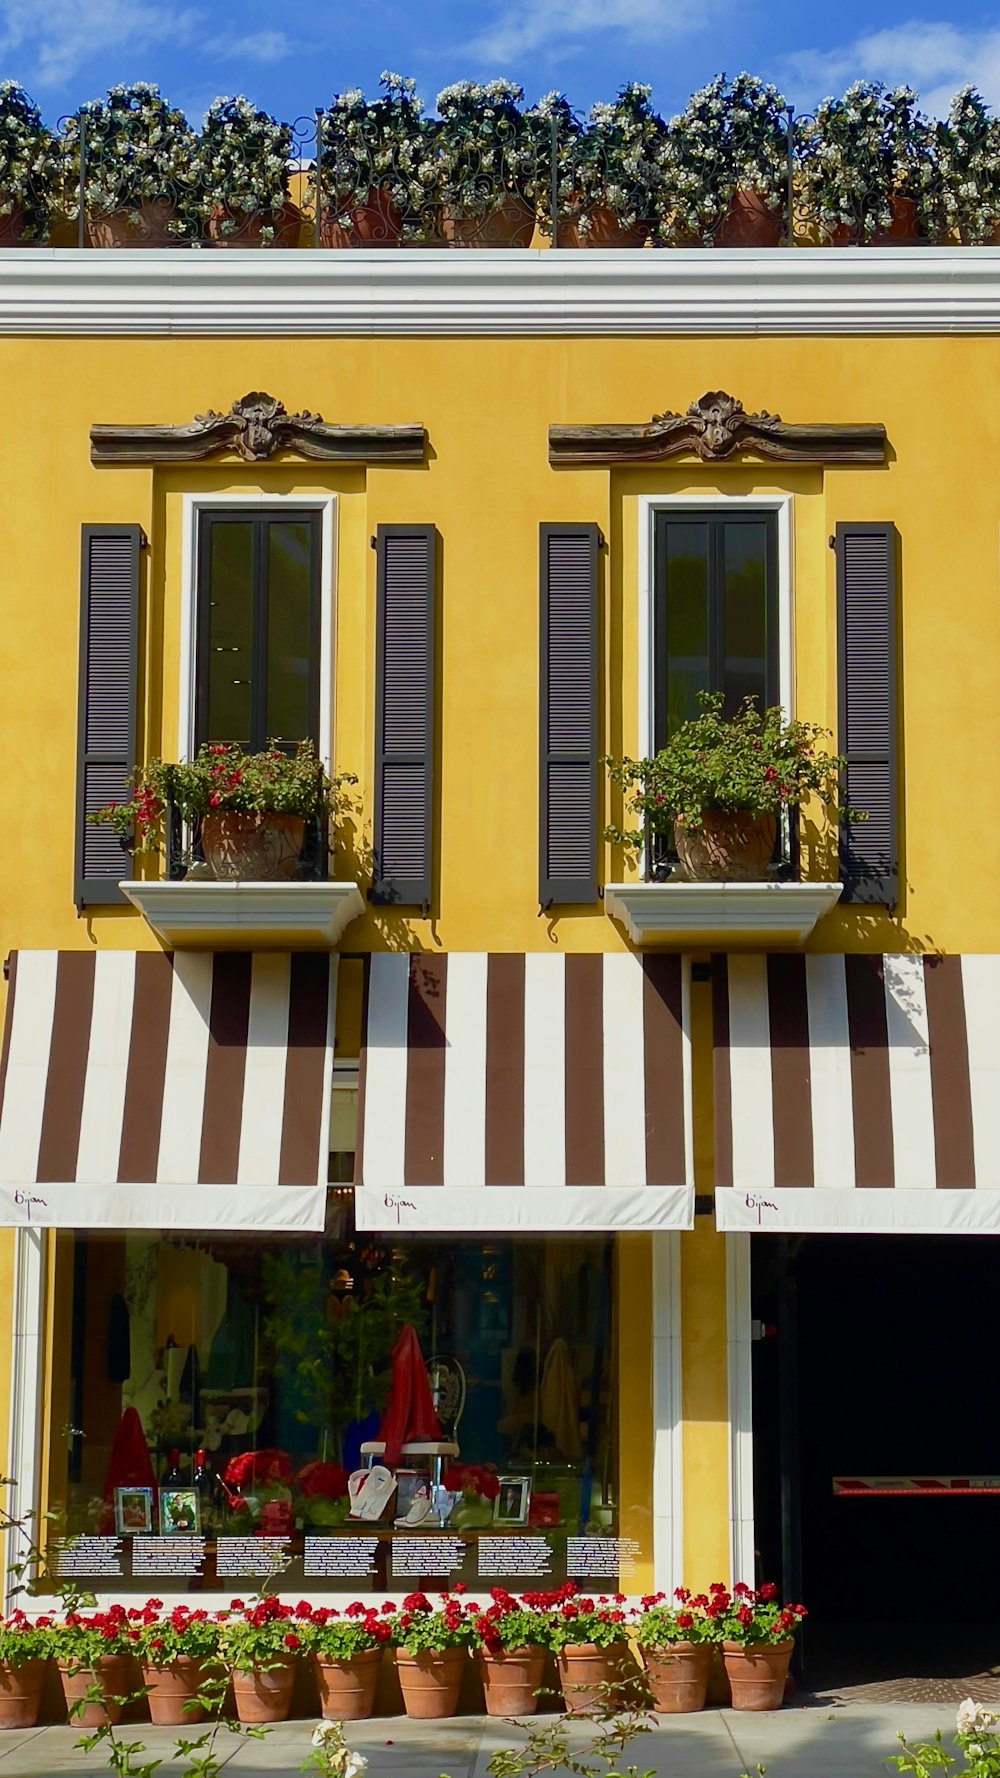 a yellow building with brown and white striped awnings